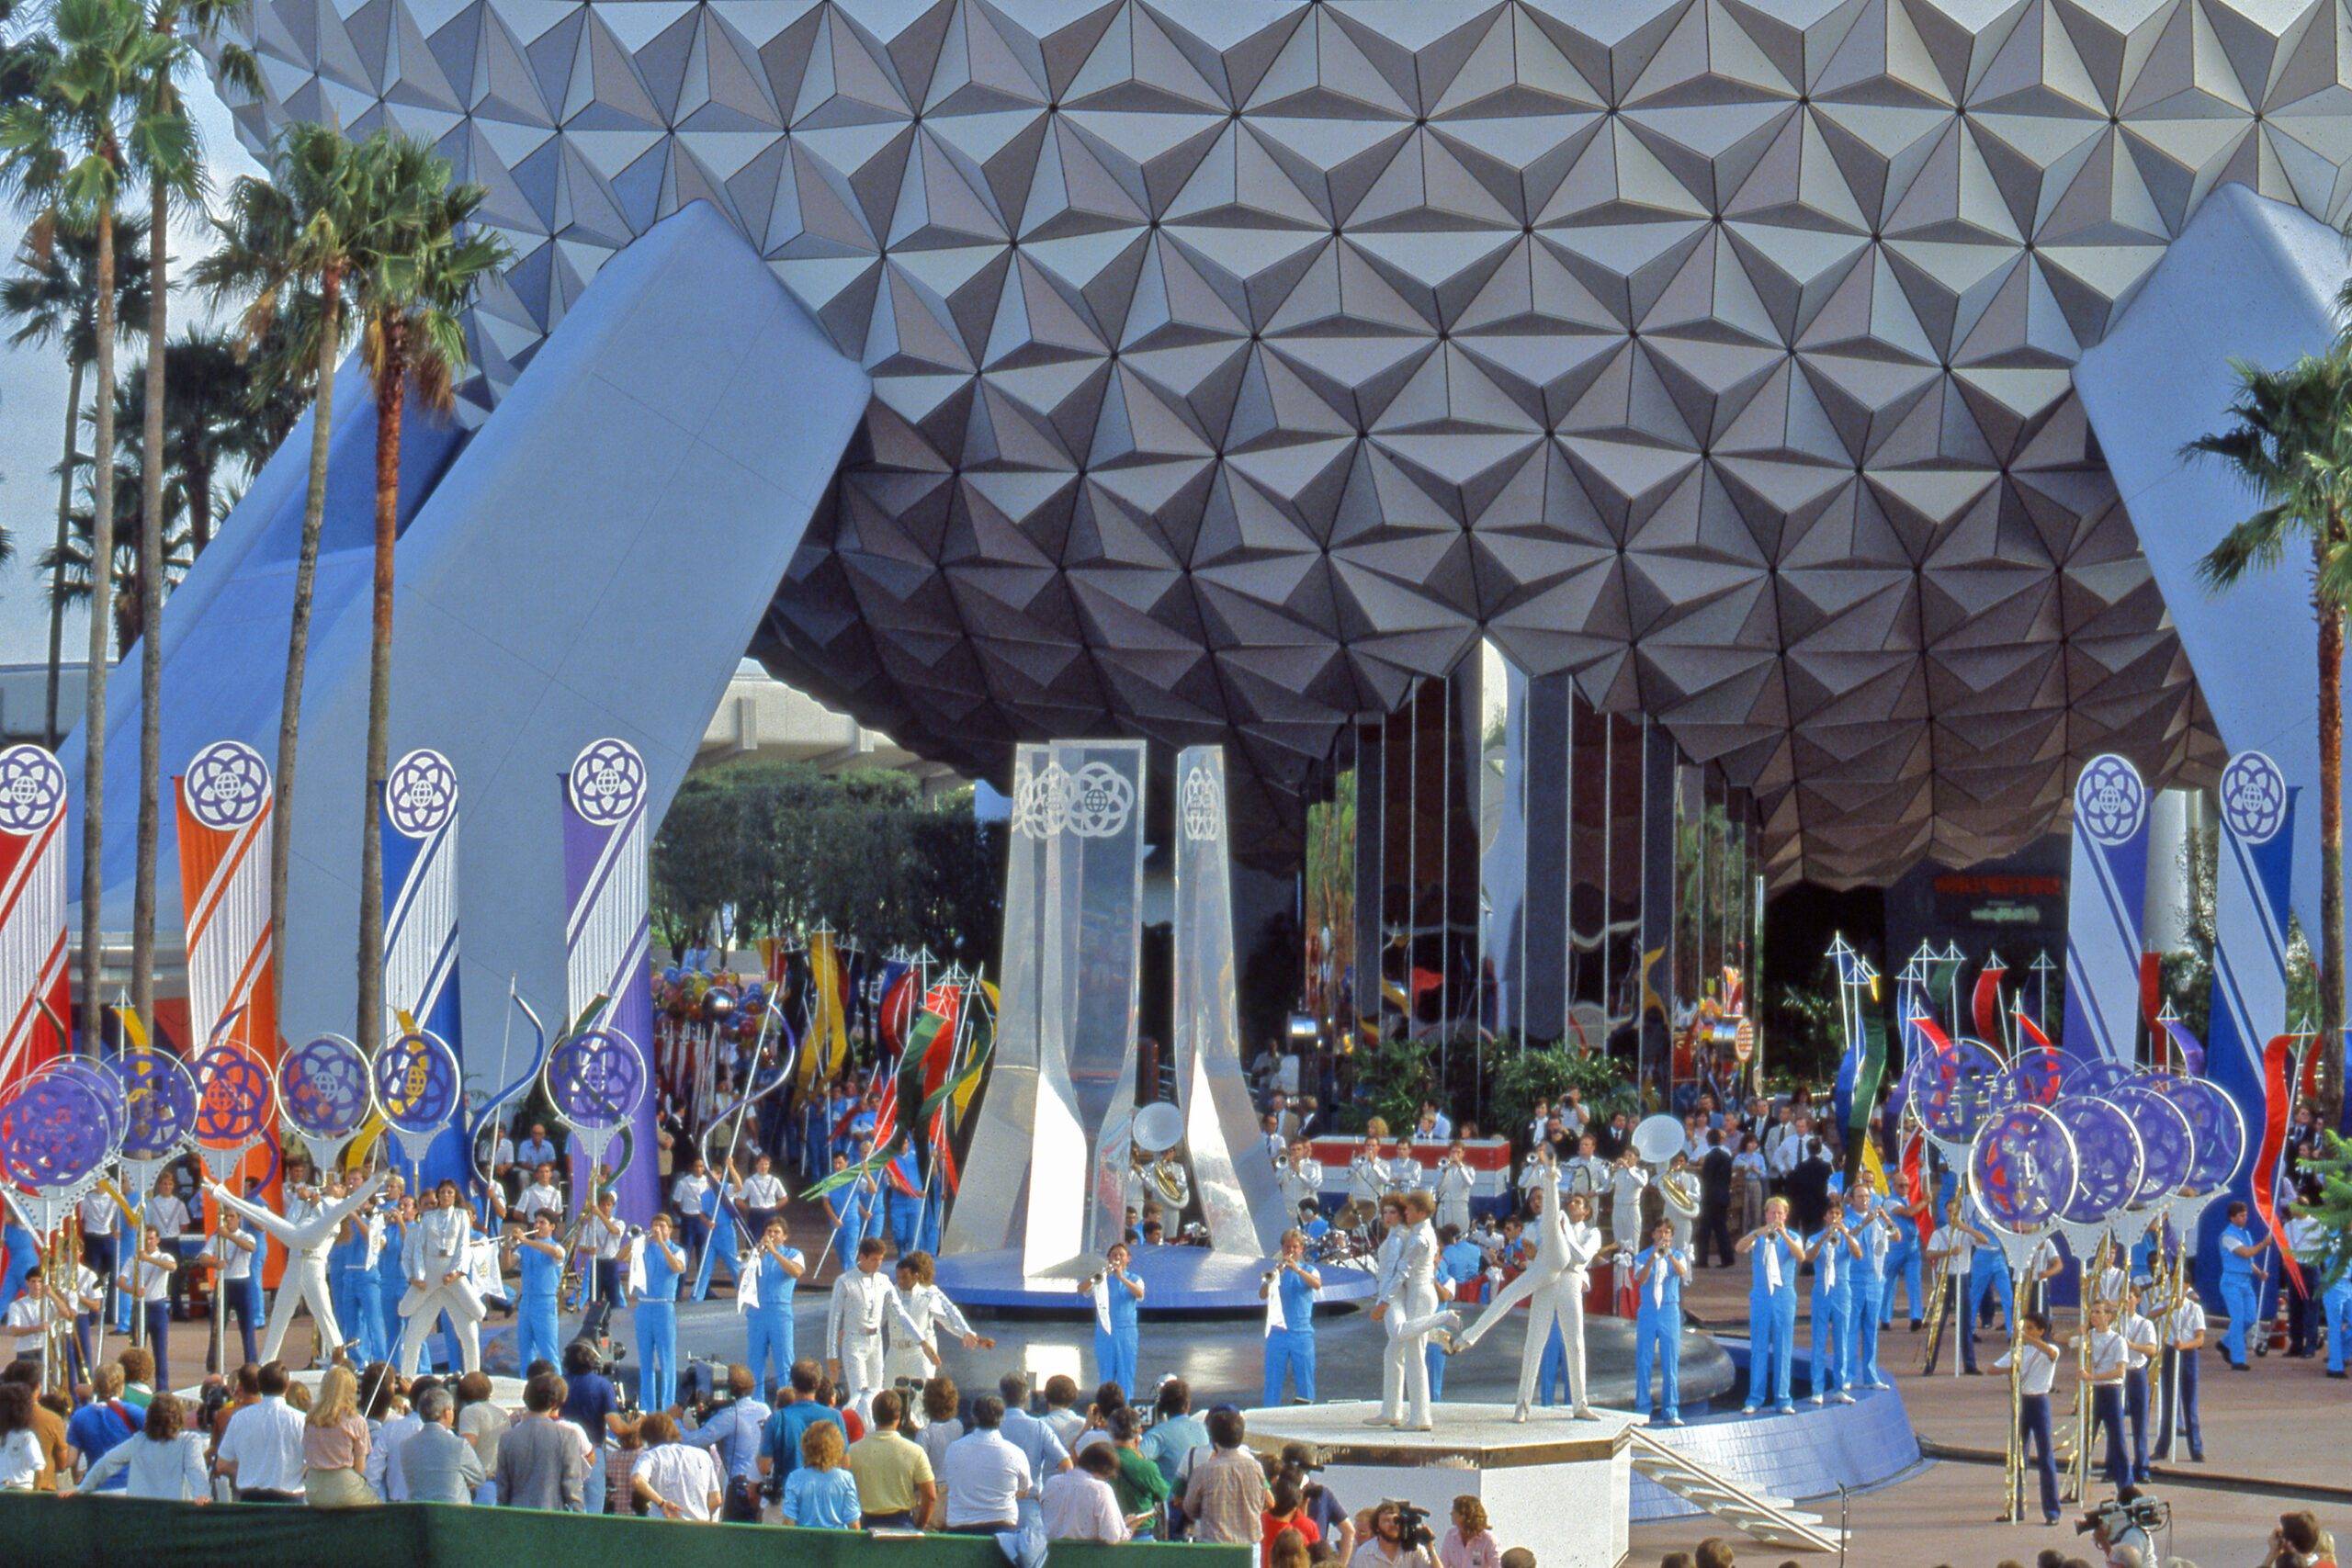 Five Decades of Magic at Walt Disney World - A look at some rare construction photos from 1980 - 1989